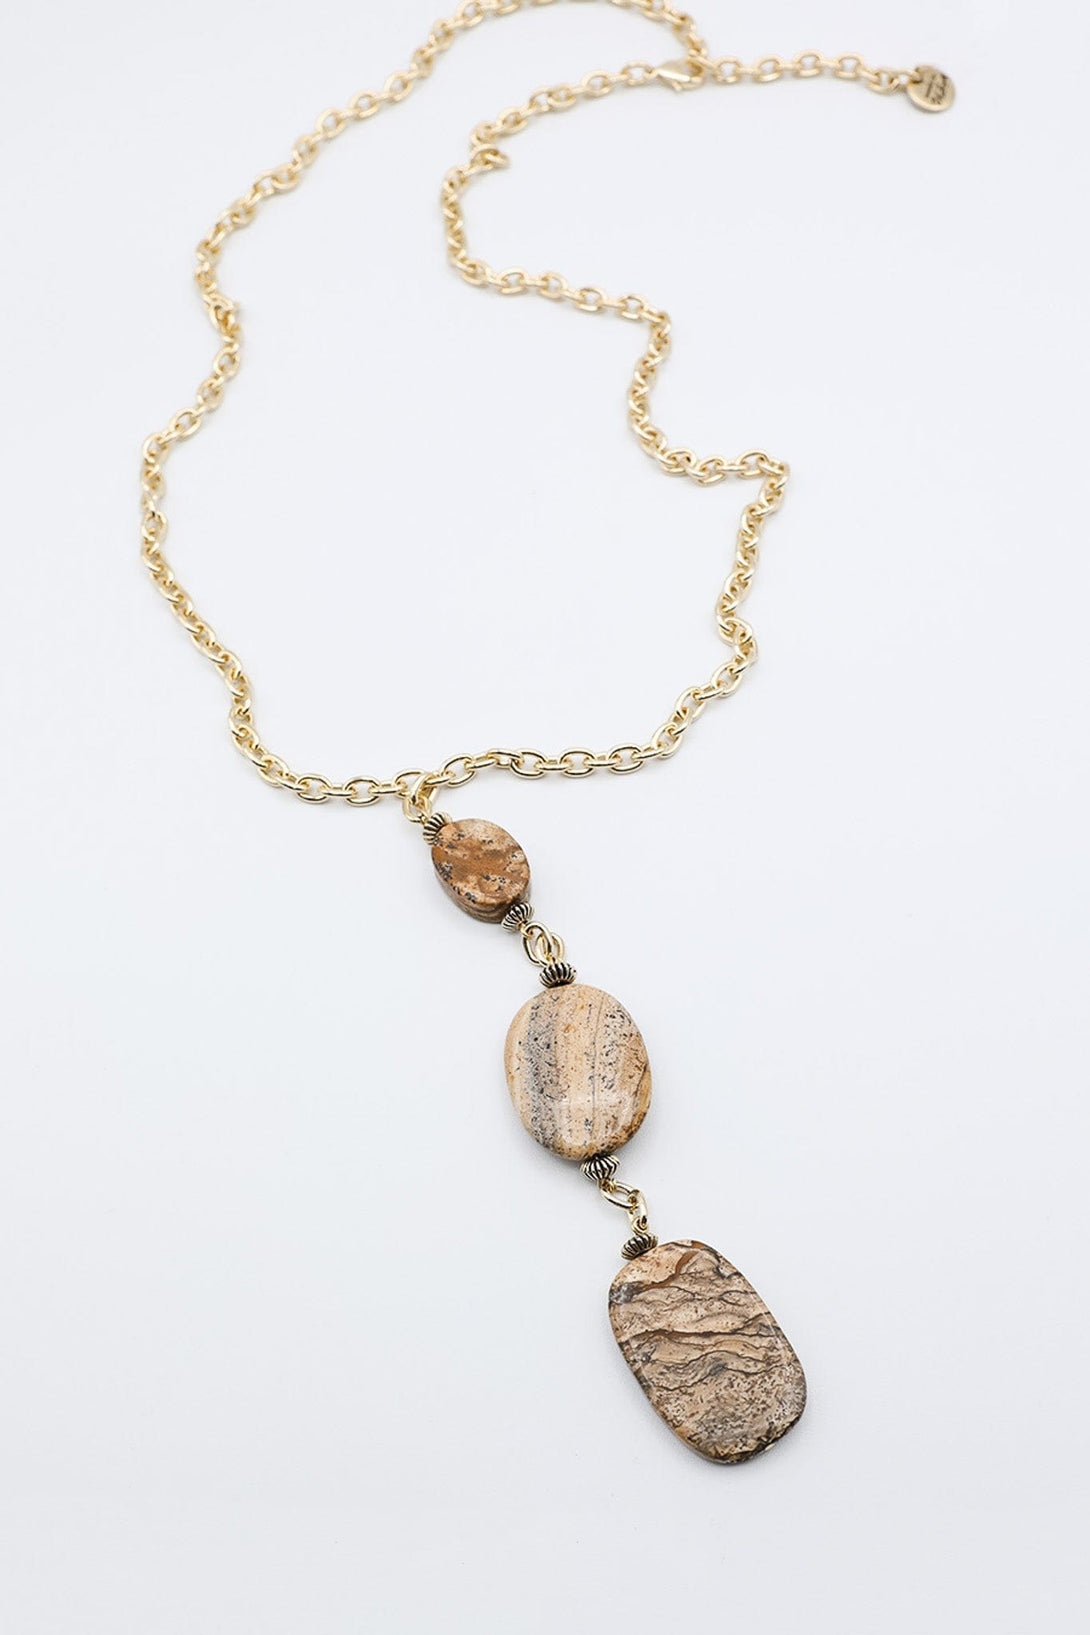 Rock Steady Long Gold Necklace with Three Flat Polished Stone Drop Feature